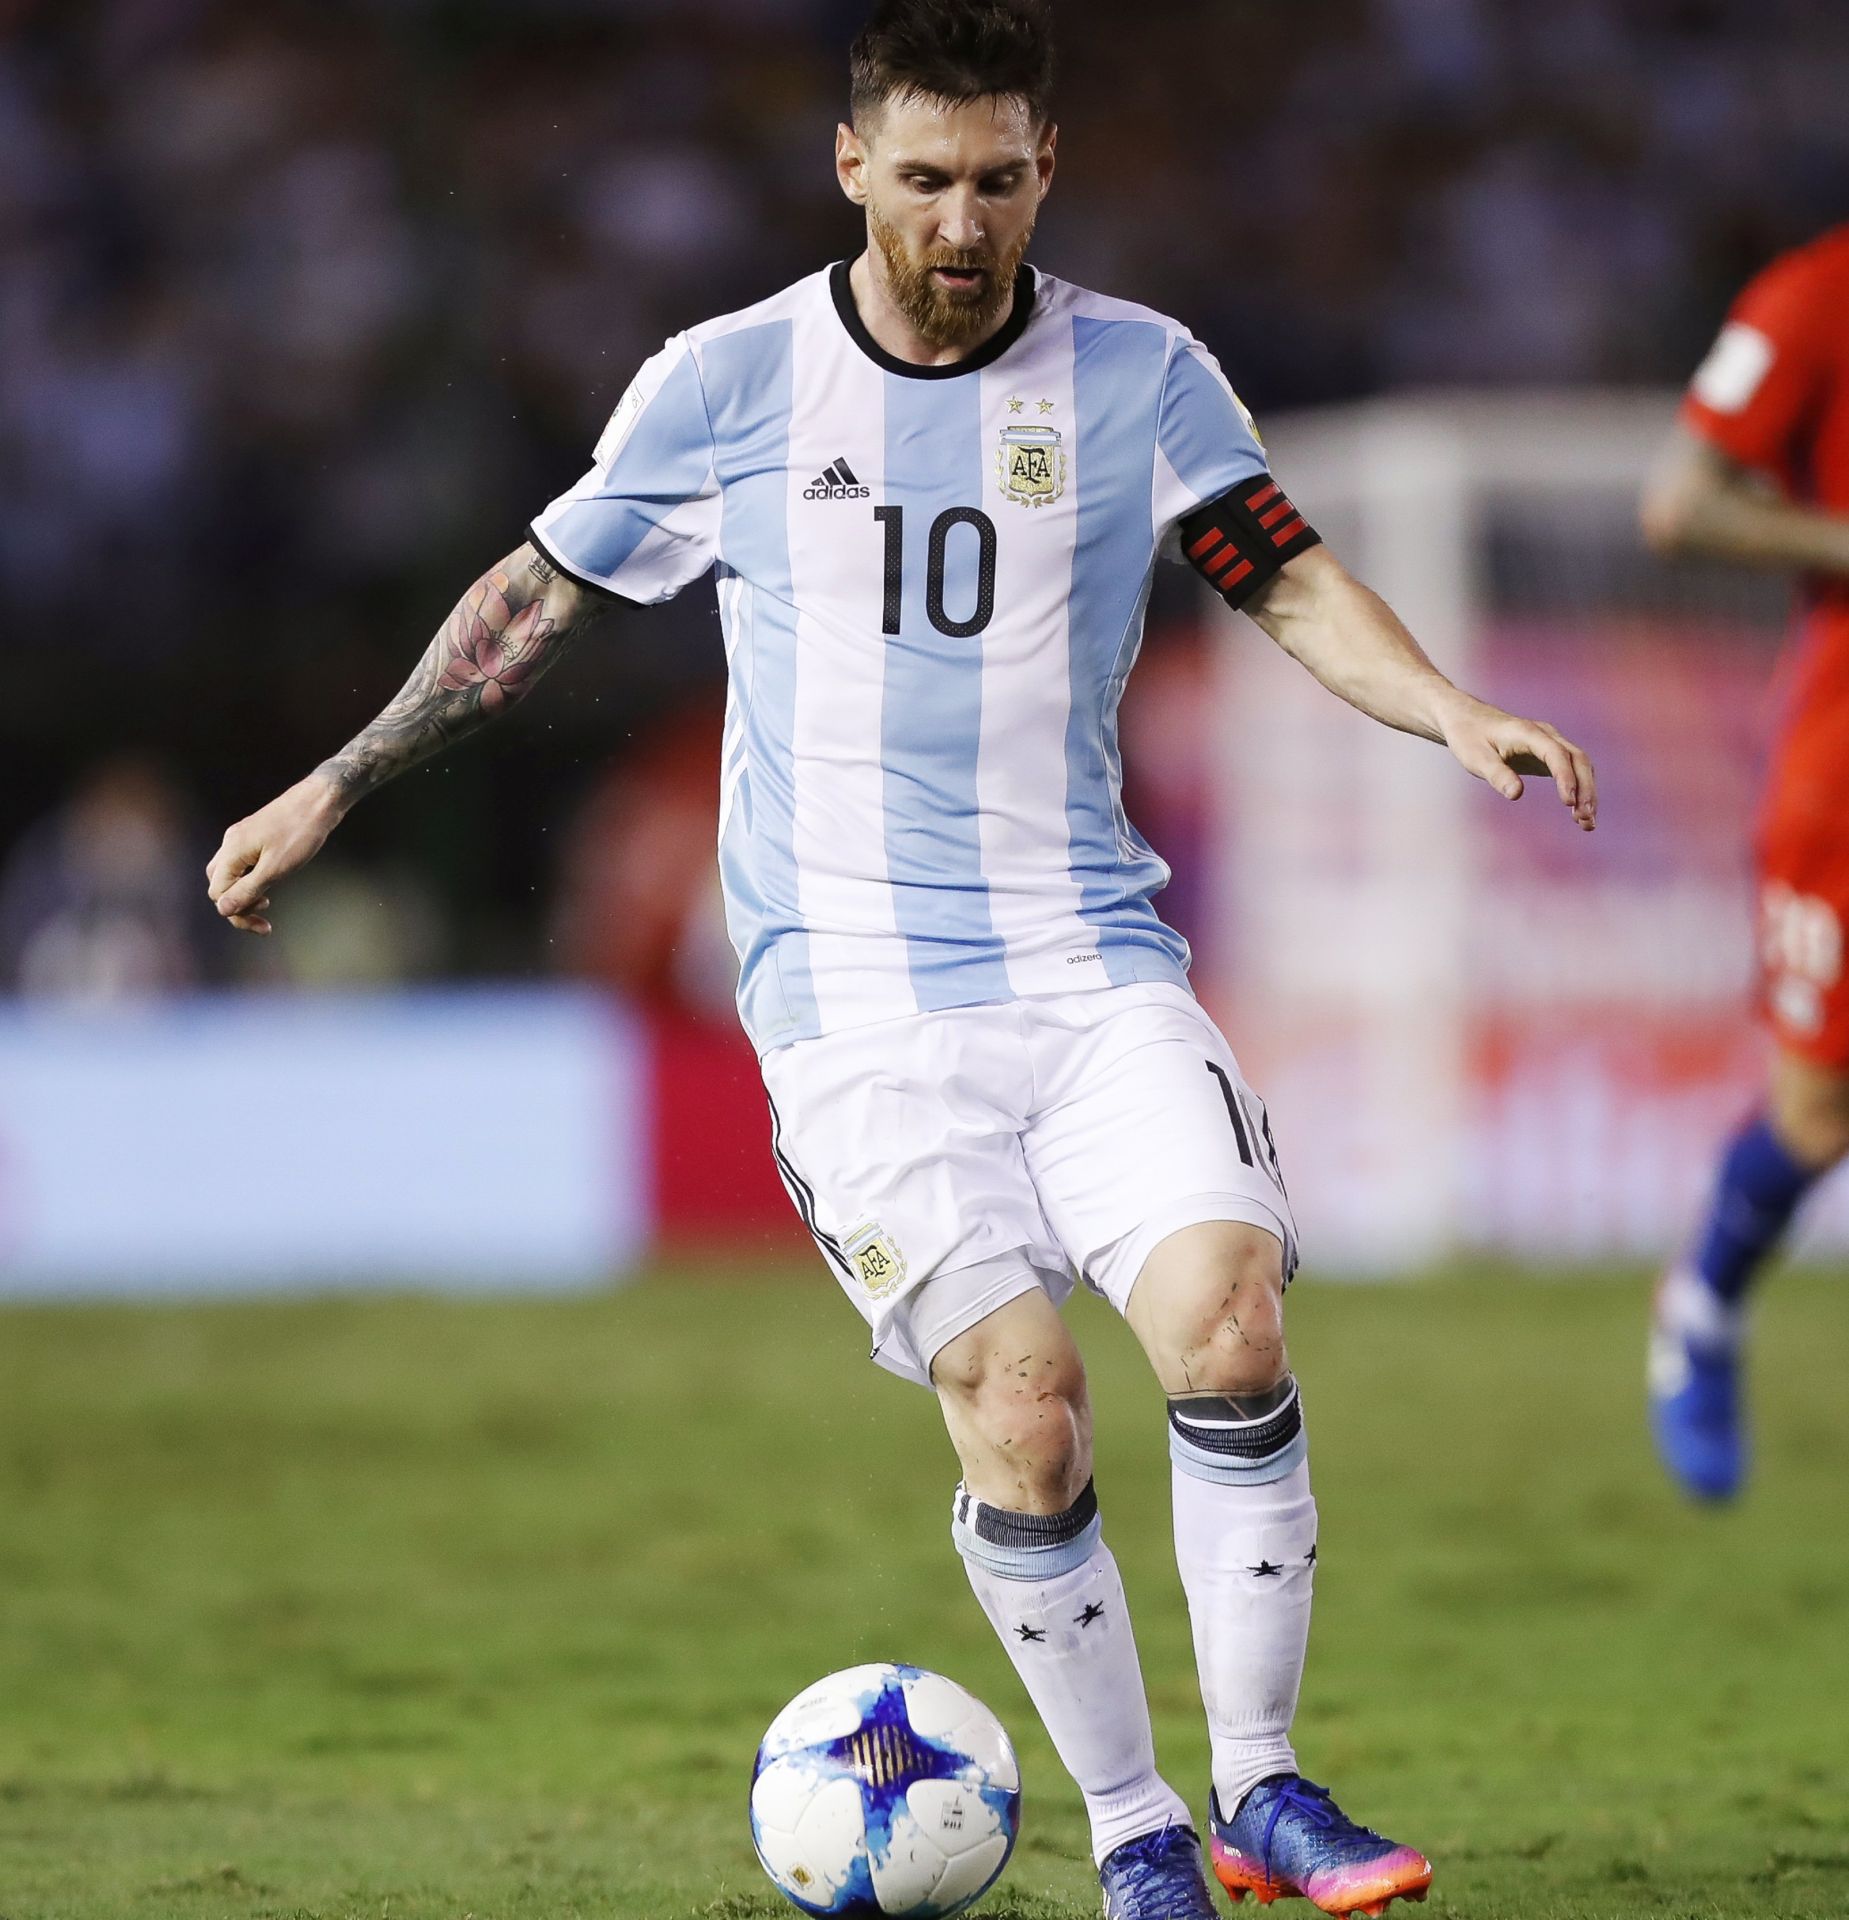 epa05866964 Argentina's player Lionel Messi in action during a Russia 2018 World Cup qualifying match between Argentina and Chile in Buenos Aires, Argentina, 23 March 2017.  EPA/DAVID FERNANDEZ